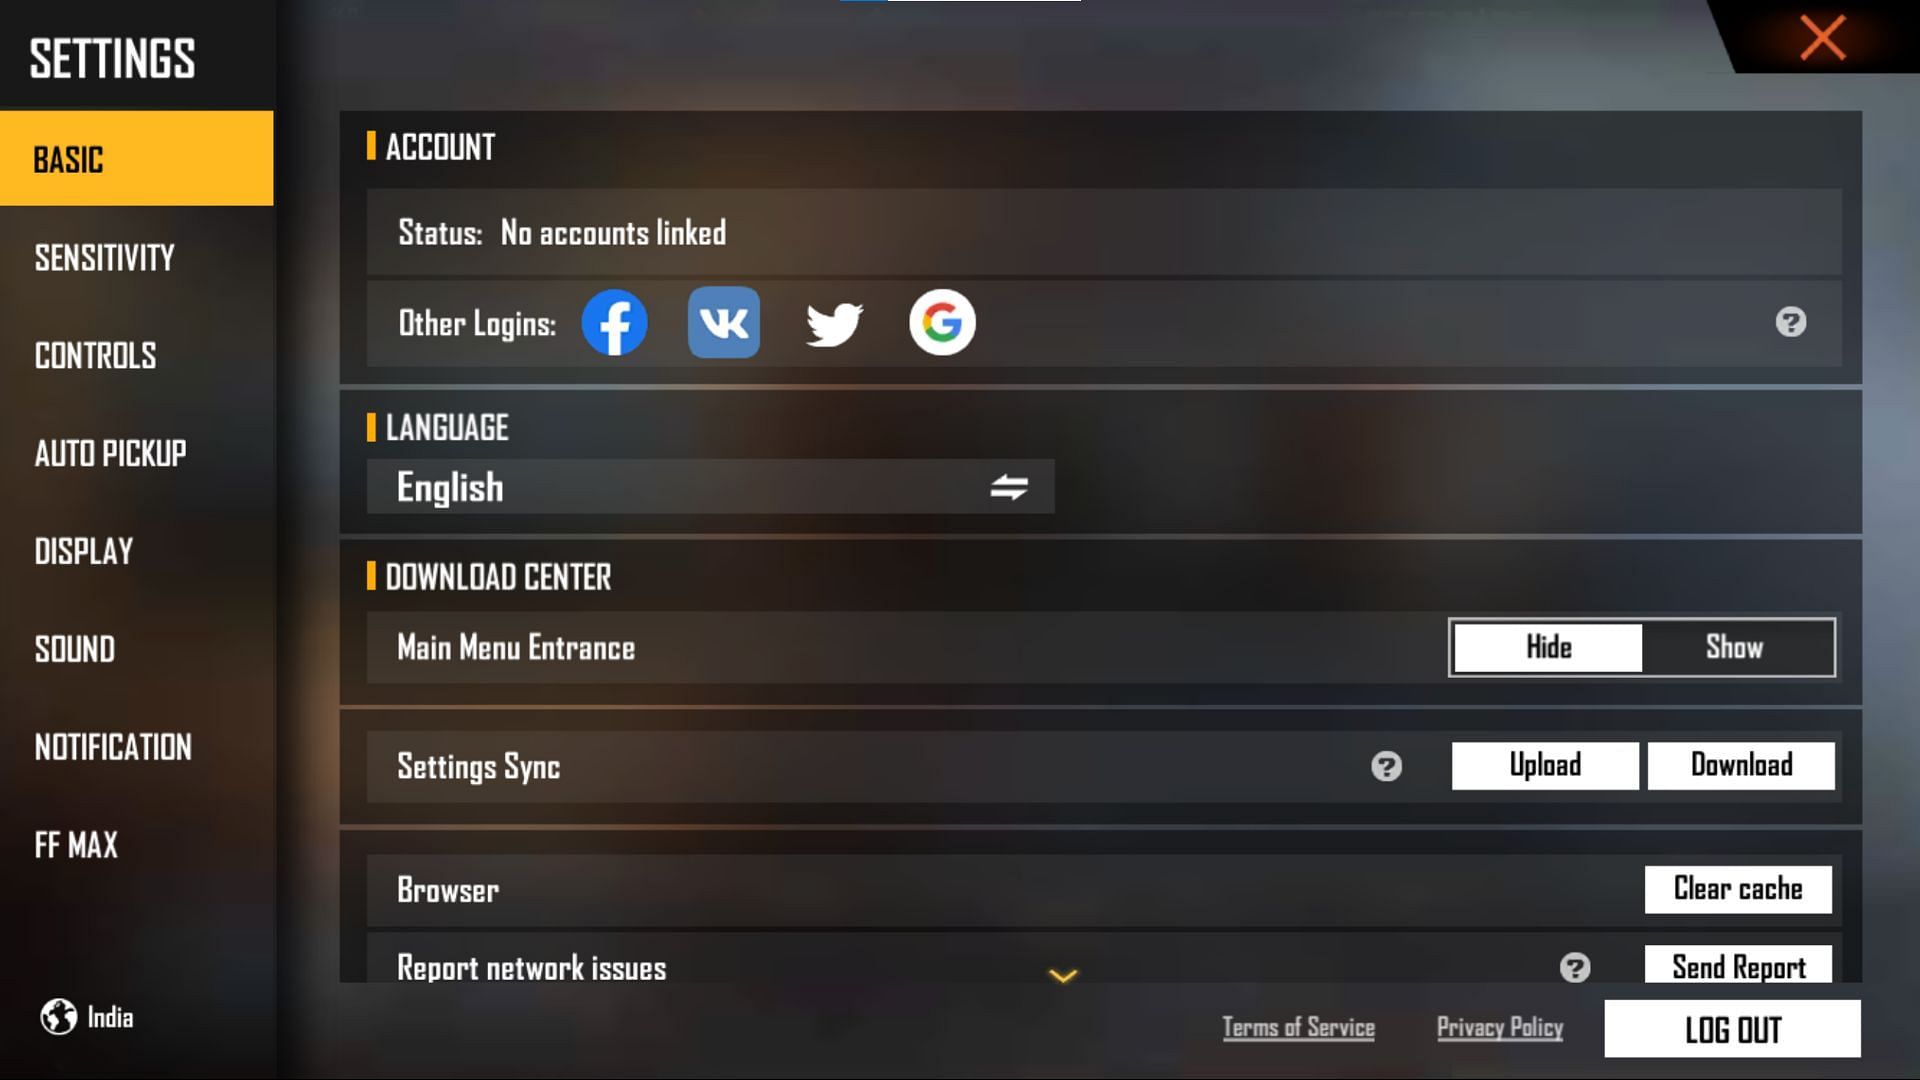 Accounts can then be linked by players to any of the desired options (Image via Garena)